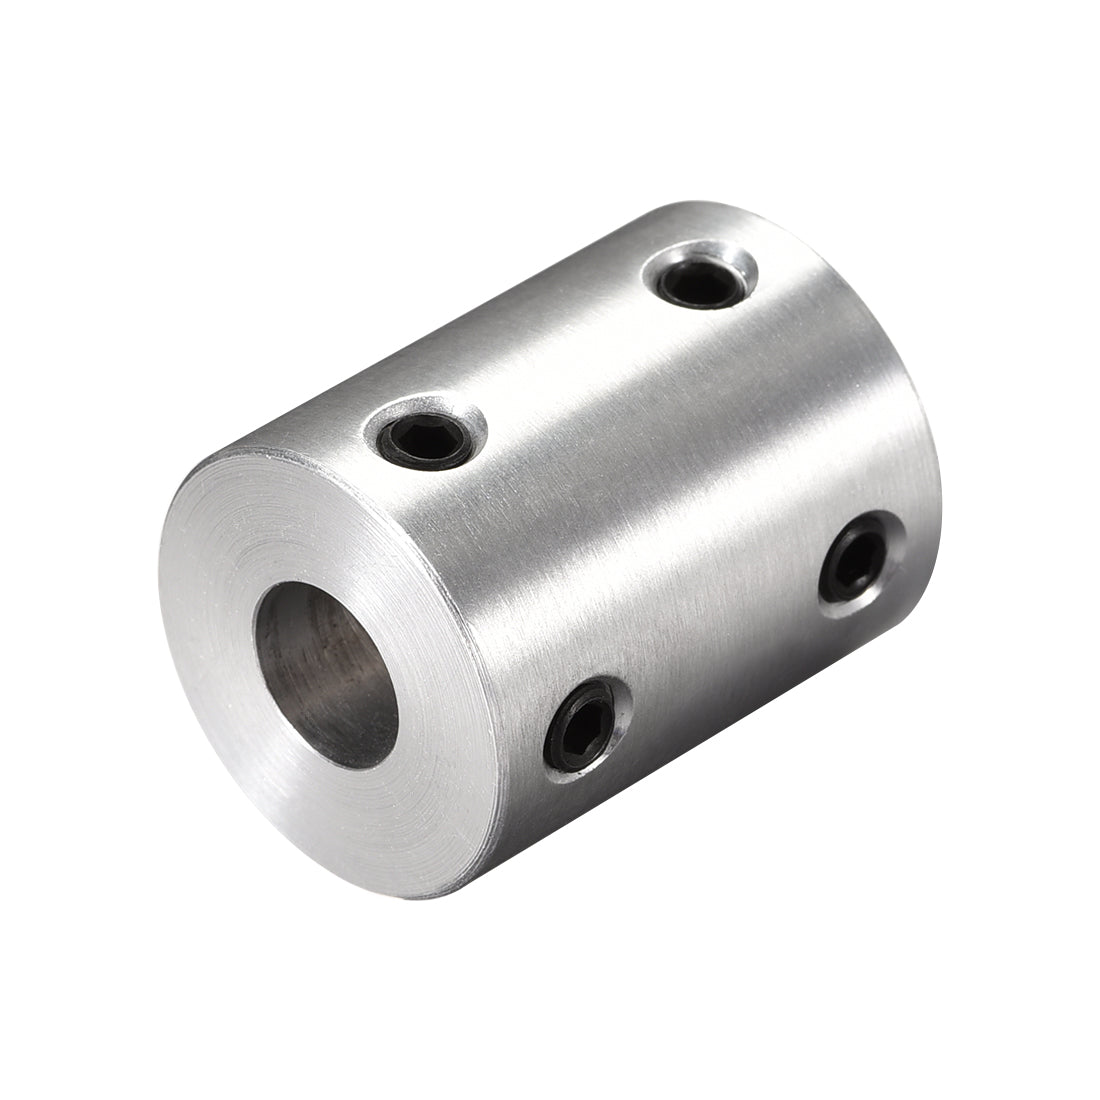 Uxcell Uxcell 10mm to 10mm Bore Rigid Coupling 25mm Length 20mm Diameter Aluminum Alloy Shaft Coupler Connector Silver